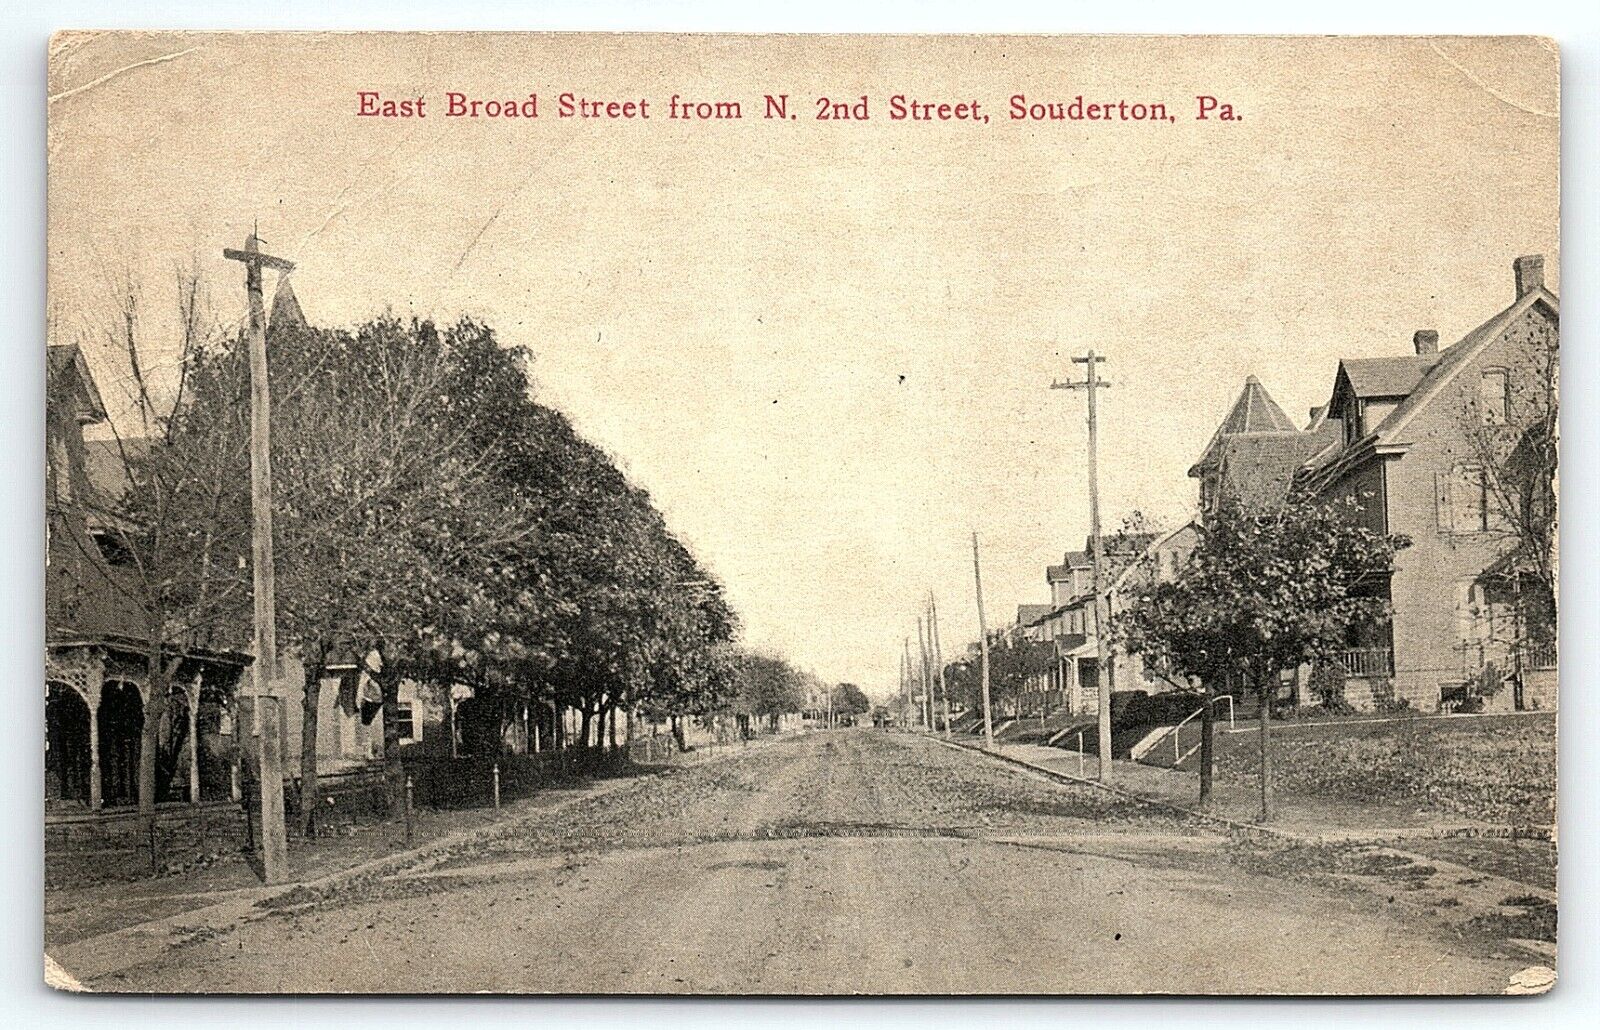 1920 SOUDERTON PA EAST BROAD STREET FROM 2nd STREET HOMES VIEW POSTCARD P4035